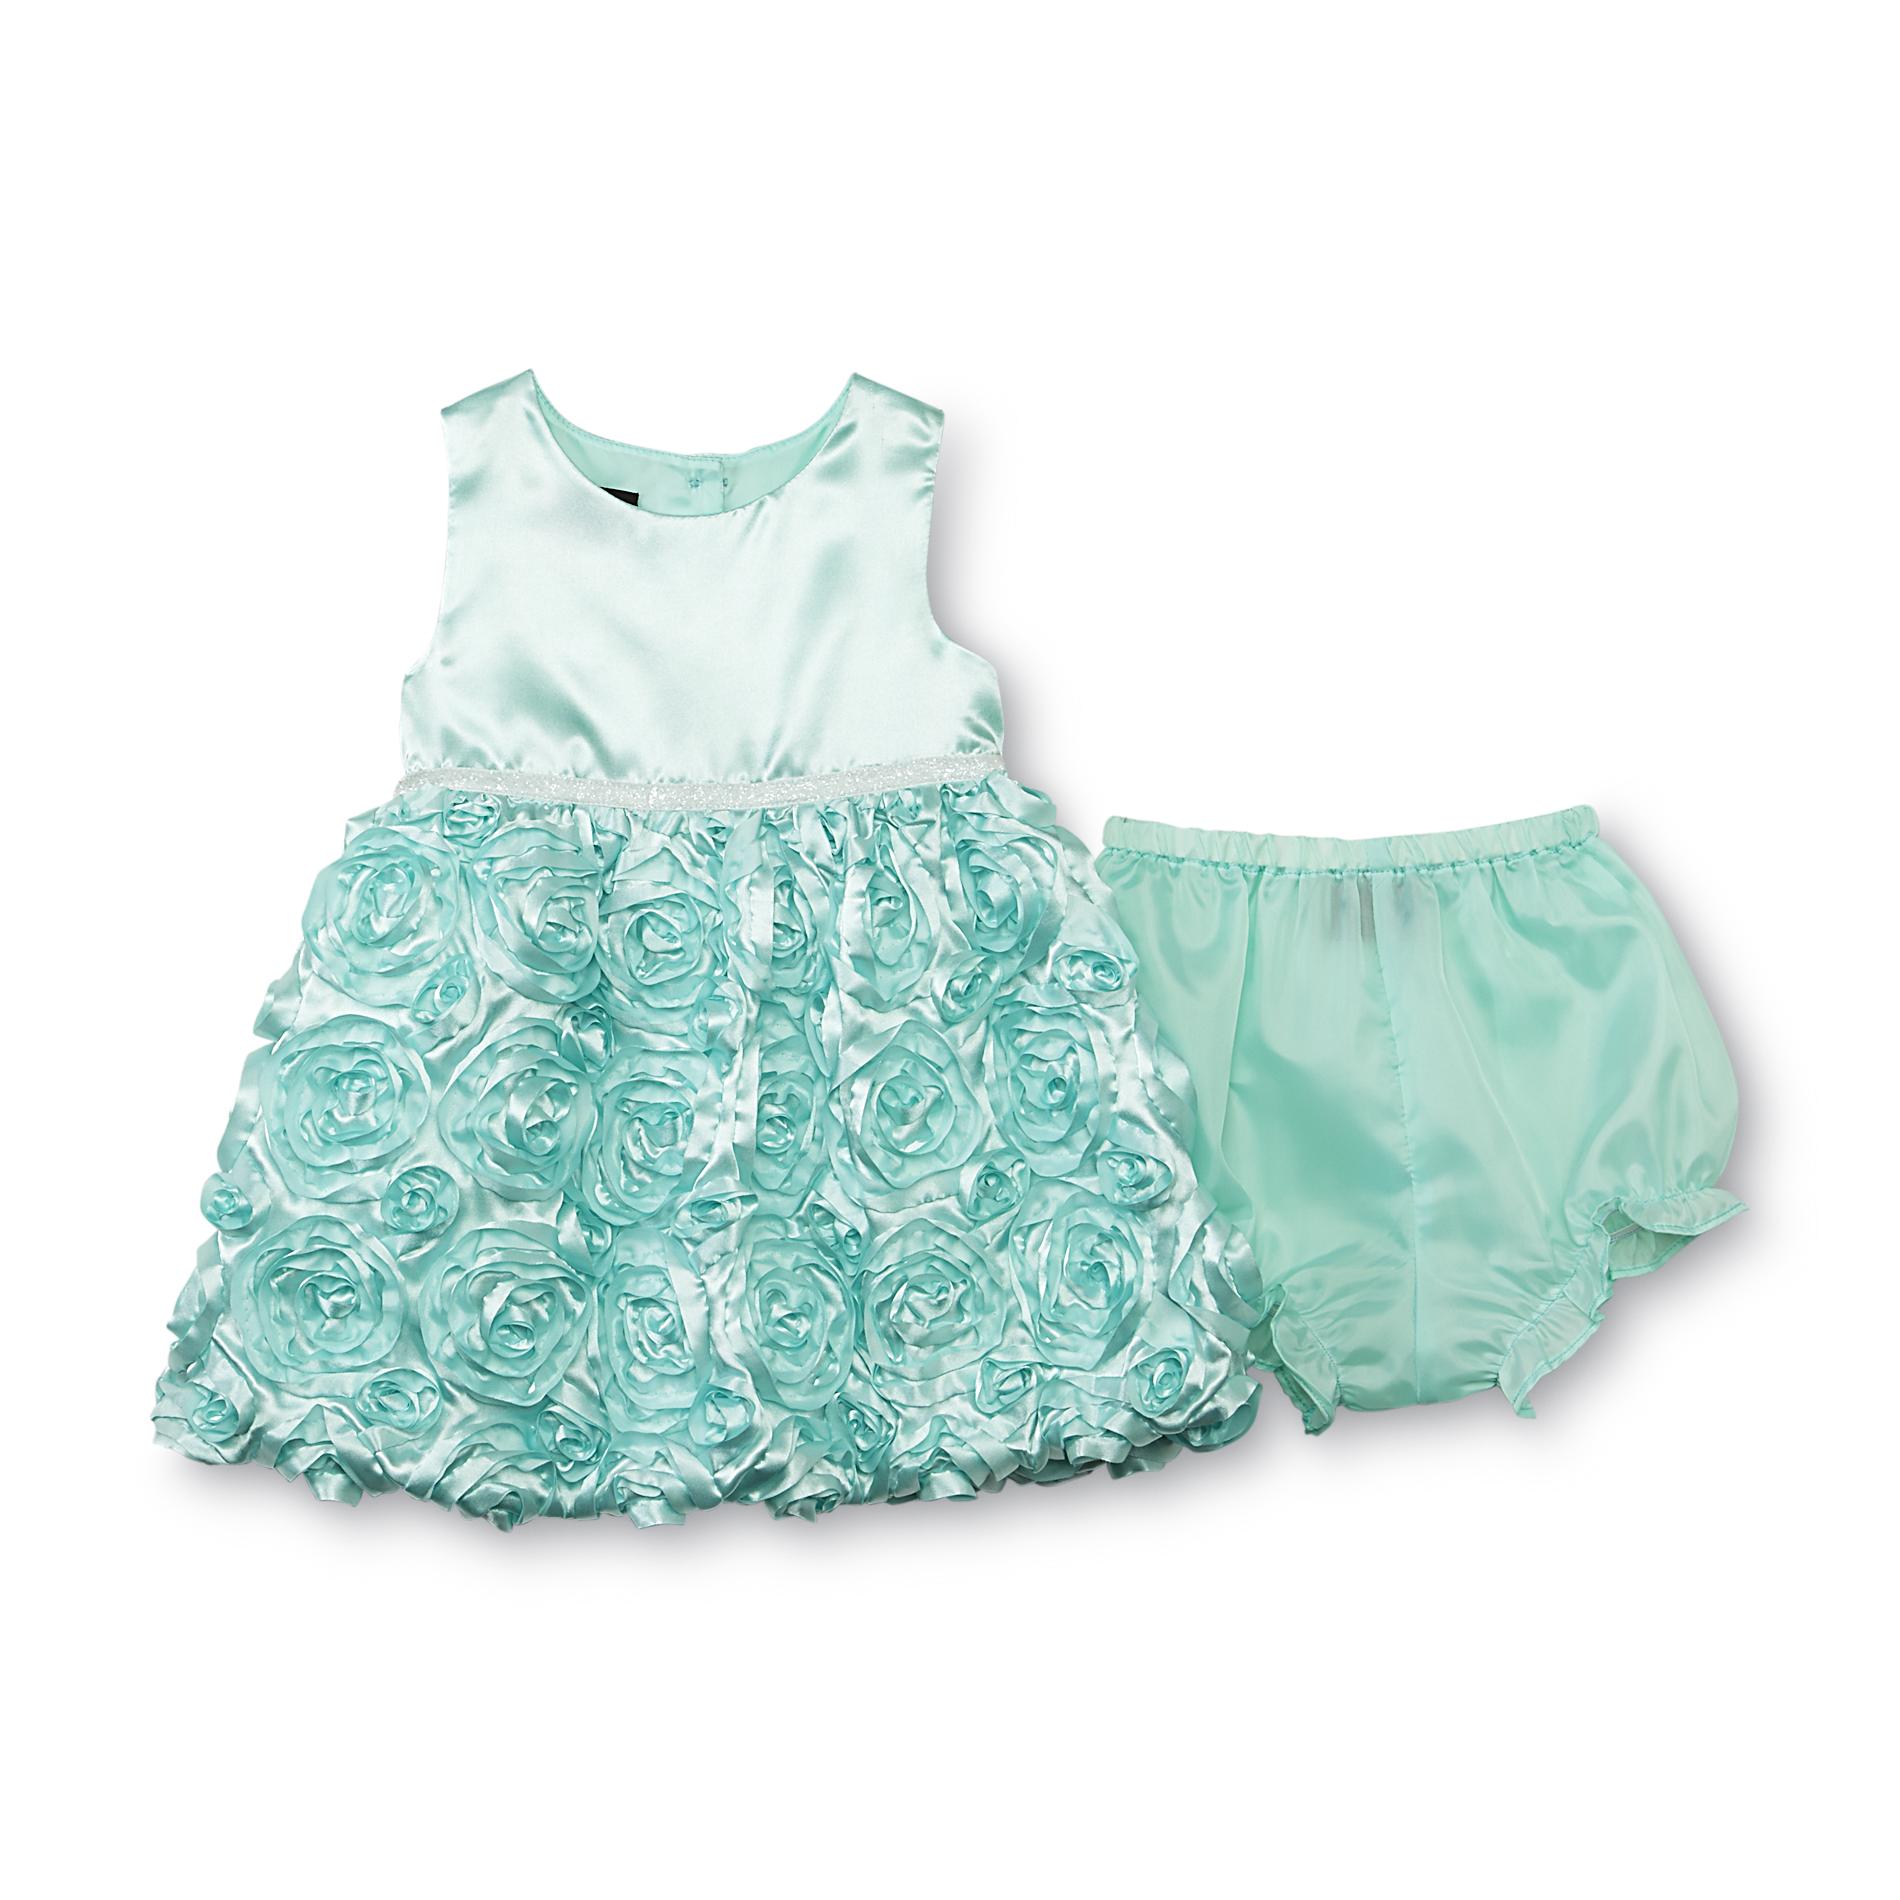 Holiday Editions Newborn Girl's Occasion Dress & Diaper Cover - Floral